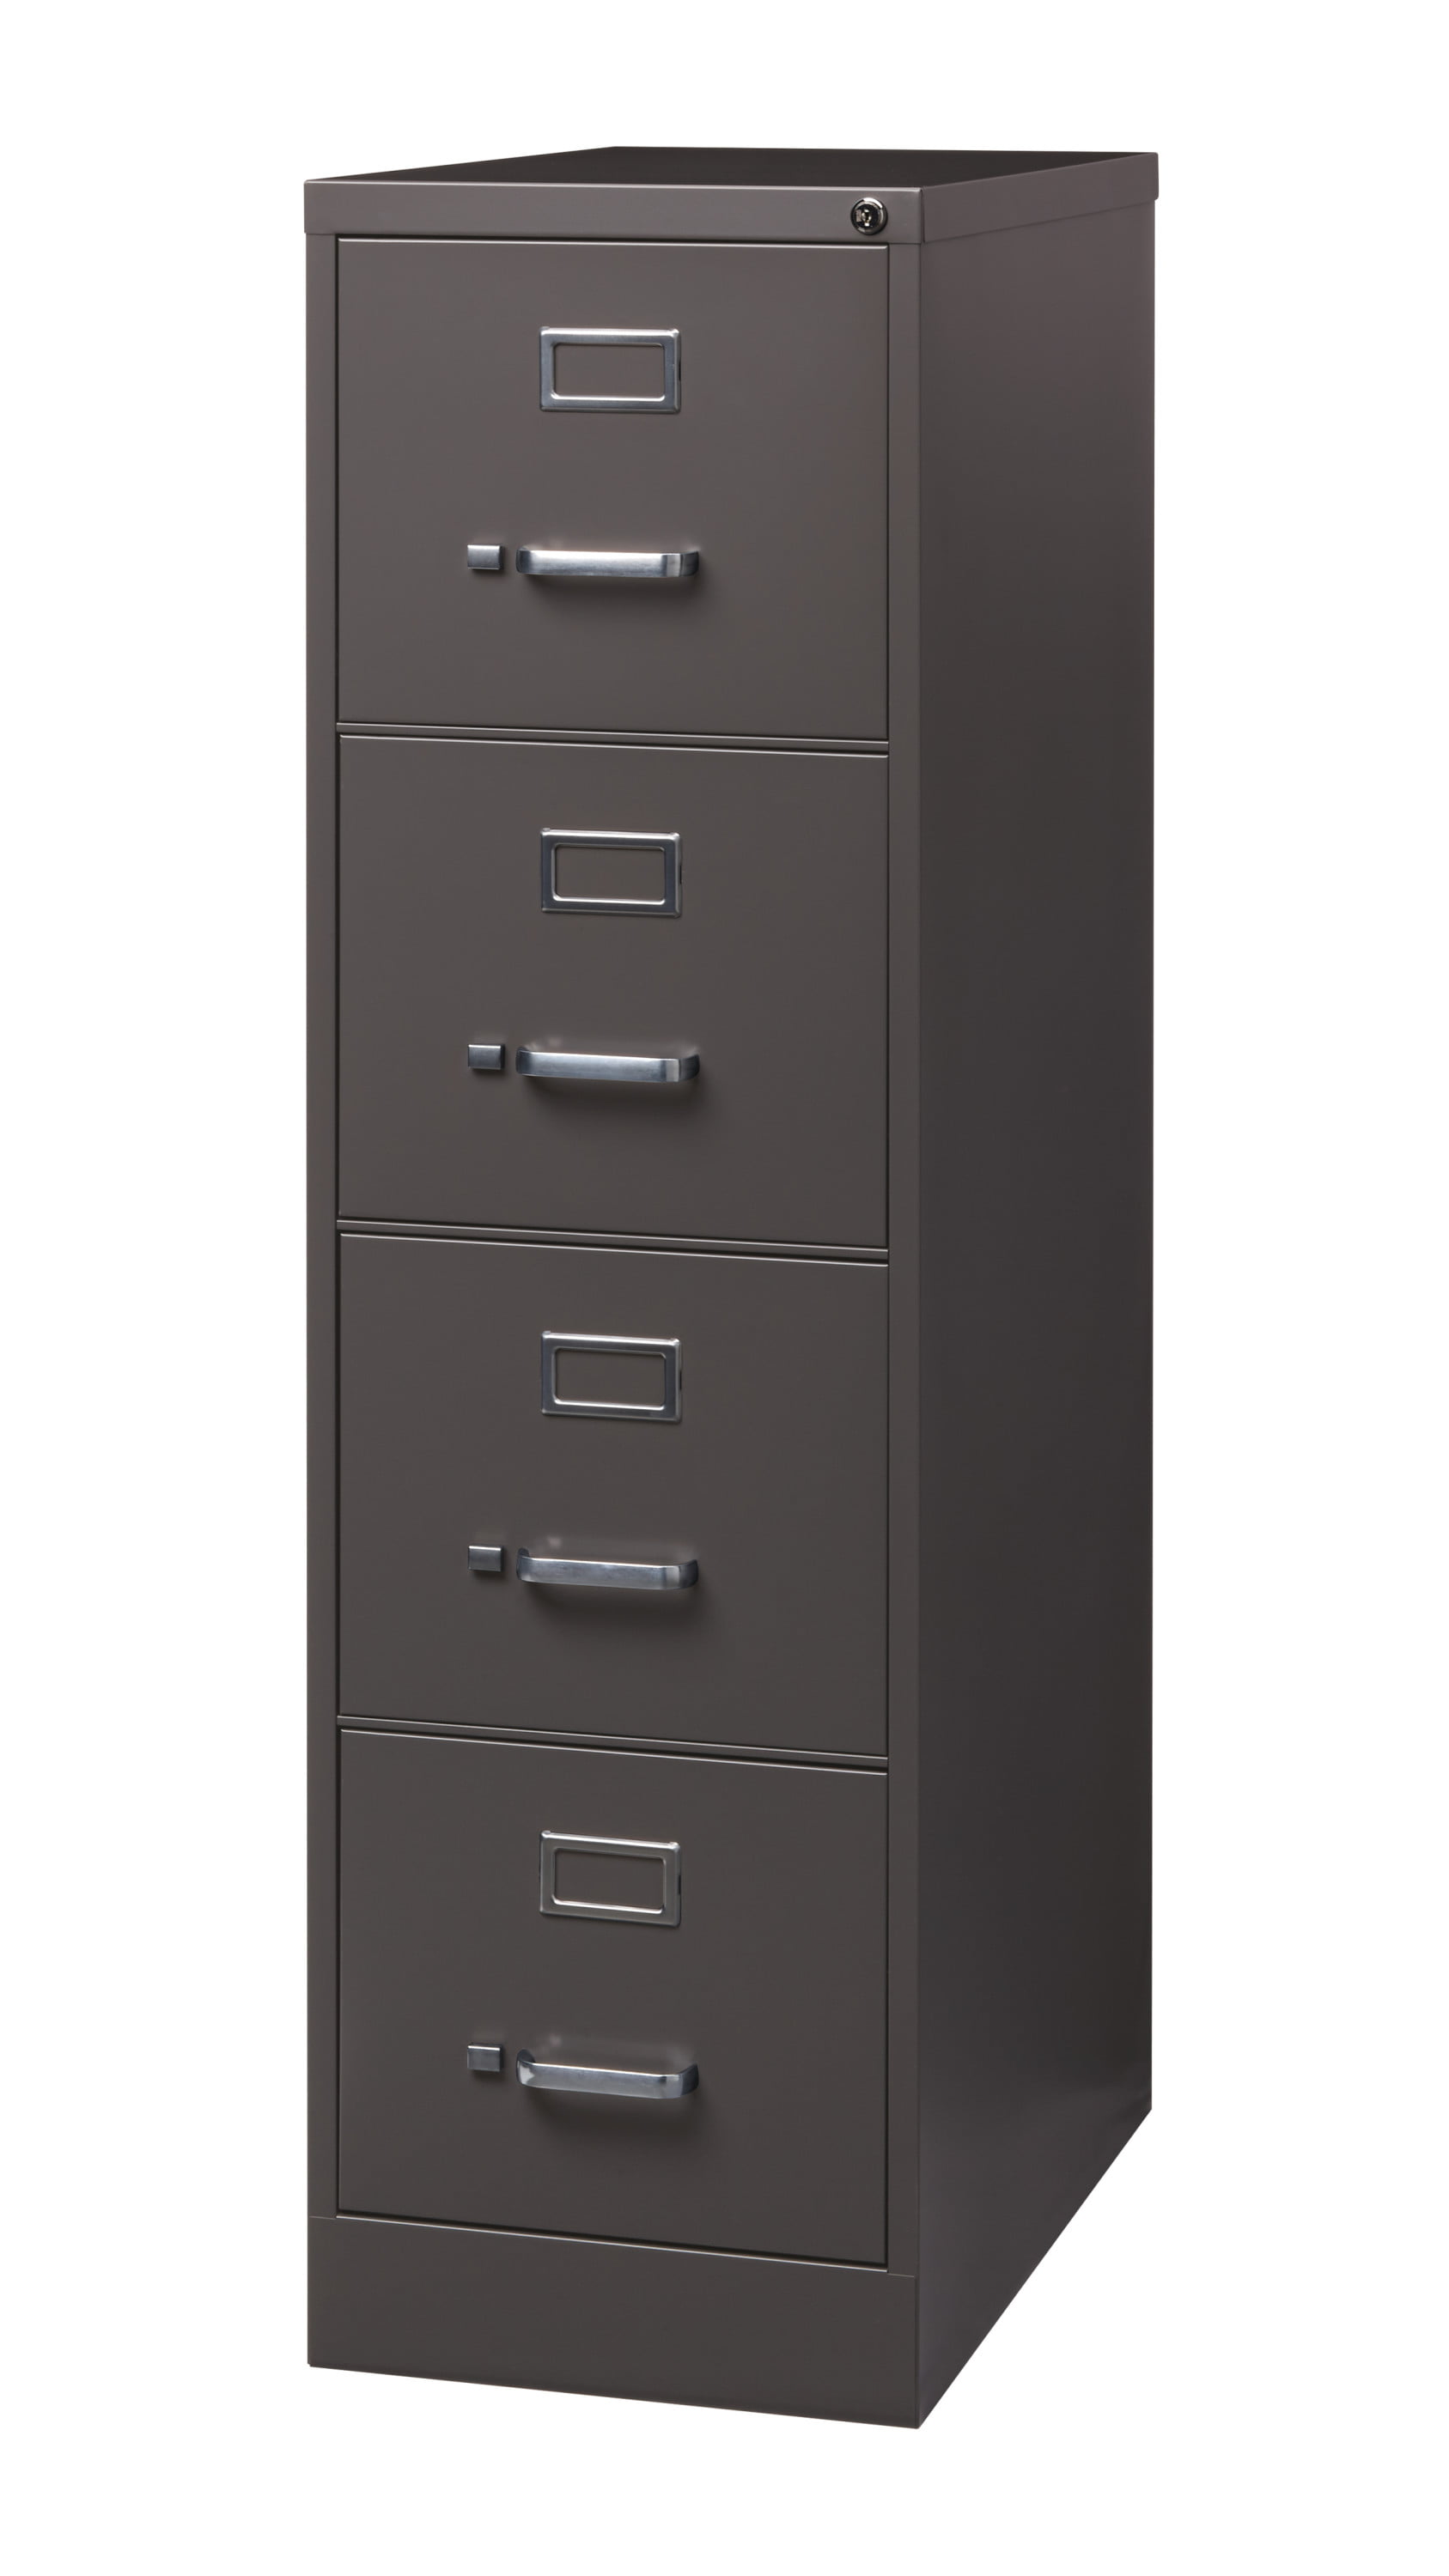 Details about   Hirsh Industries Mobile 2-drawer Pedestal File Cabinet with Casters 